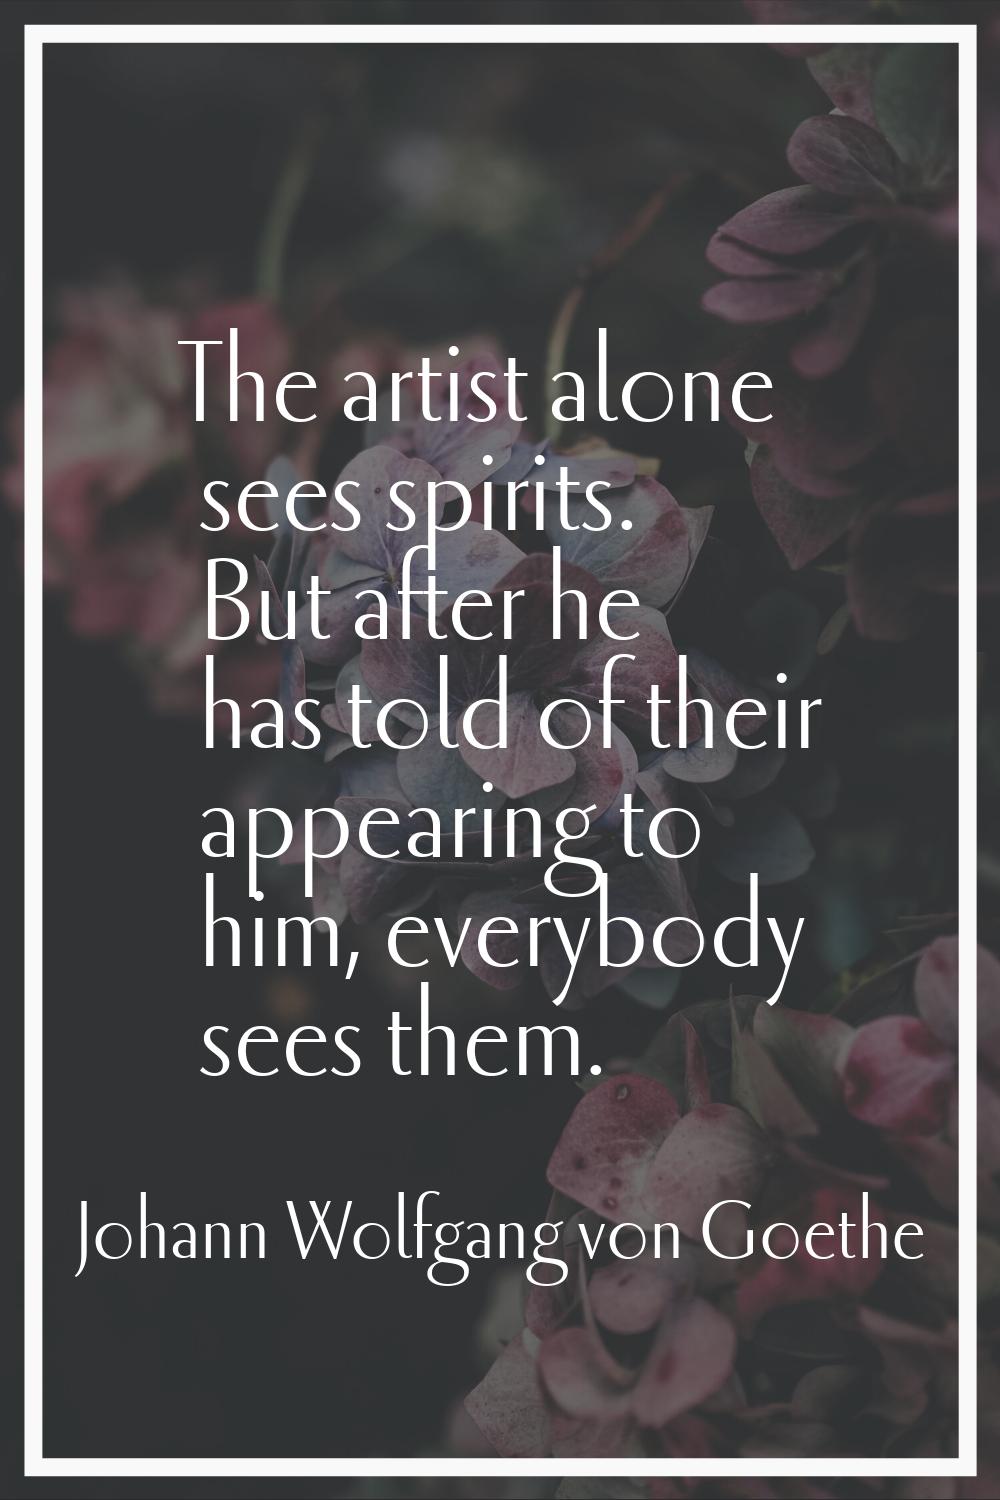 The artist alone sees spirits. But after he has told of their appearing to him, everybody sees them